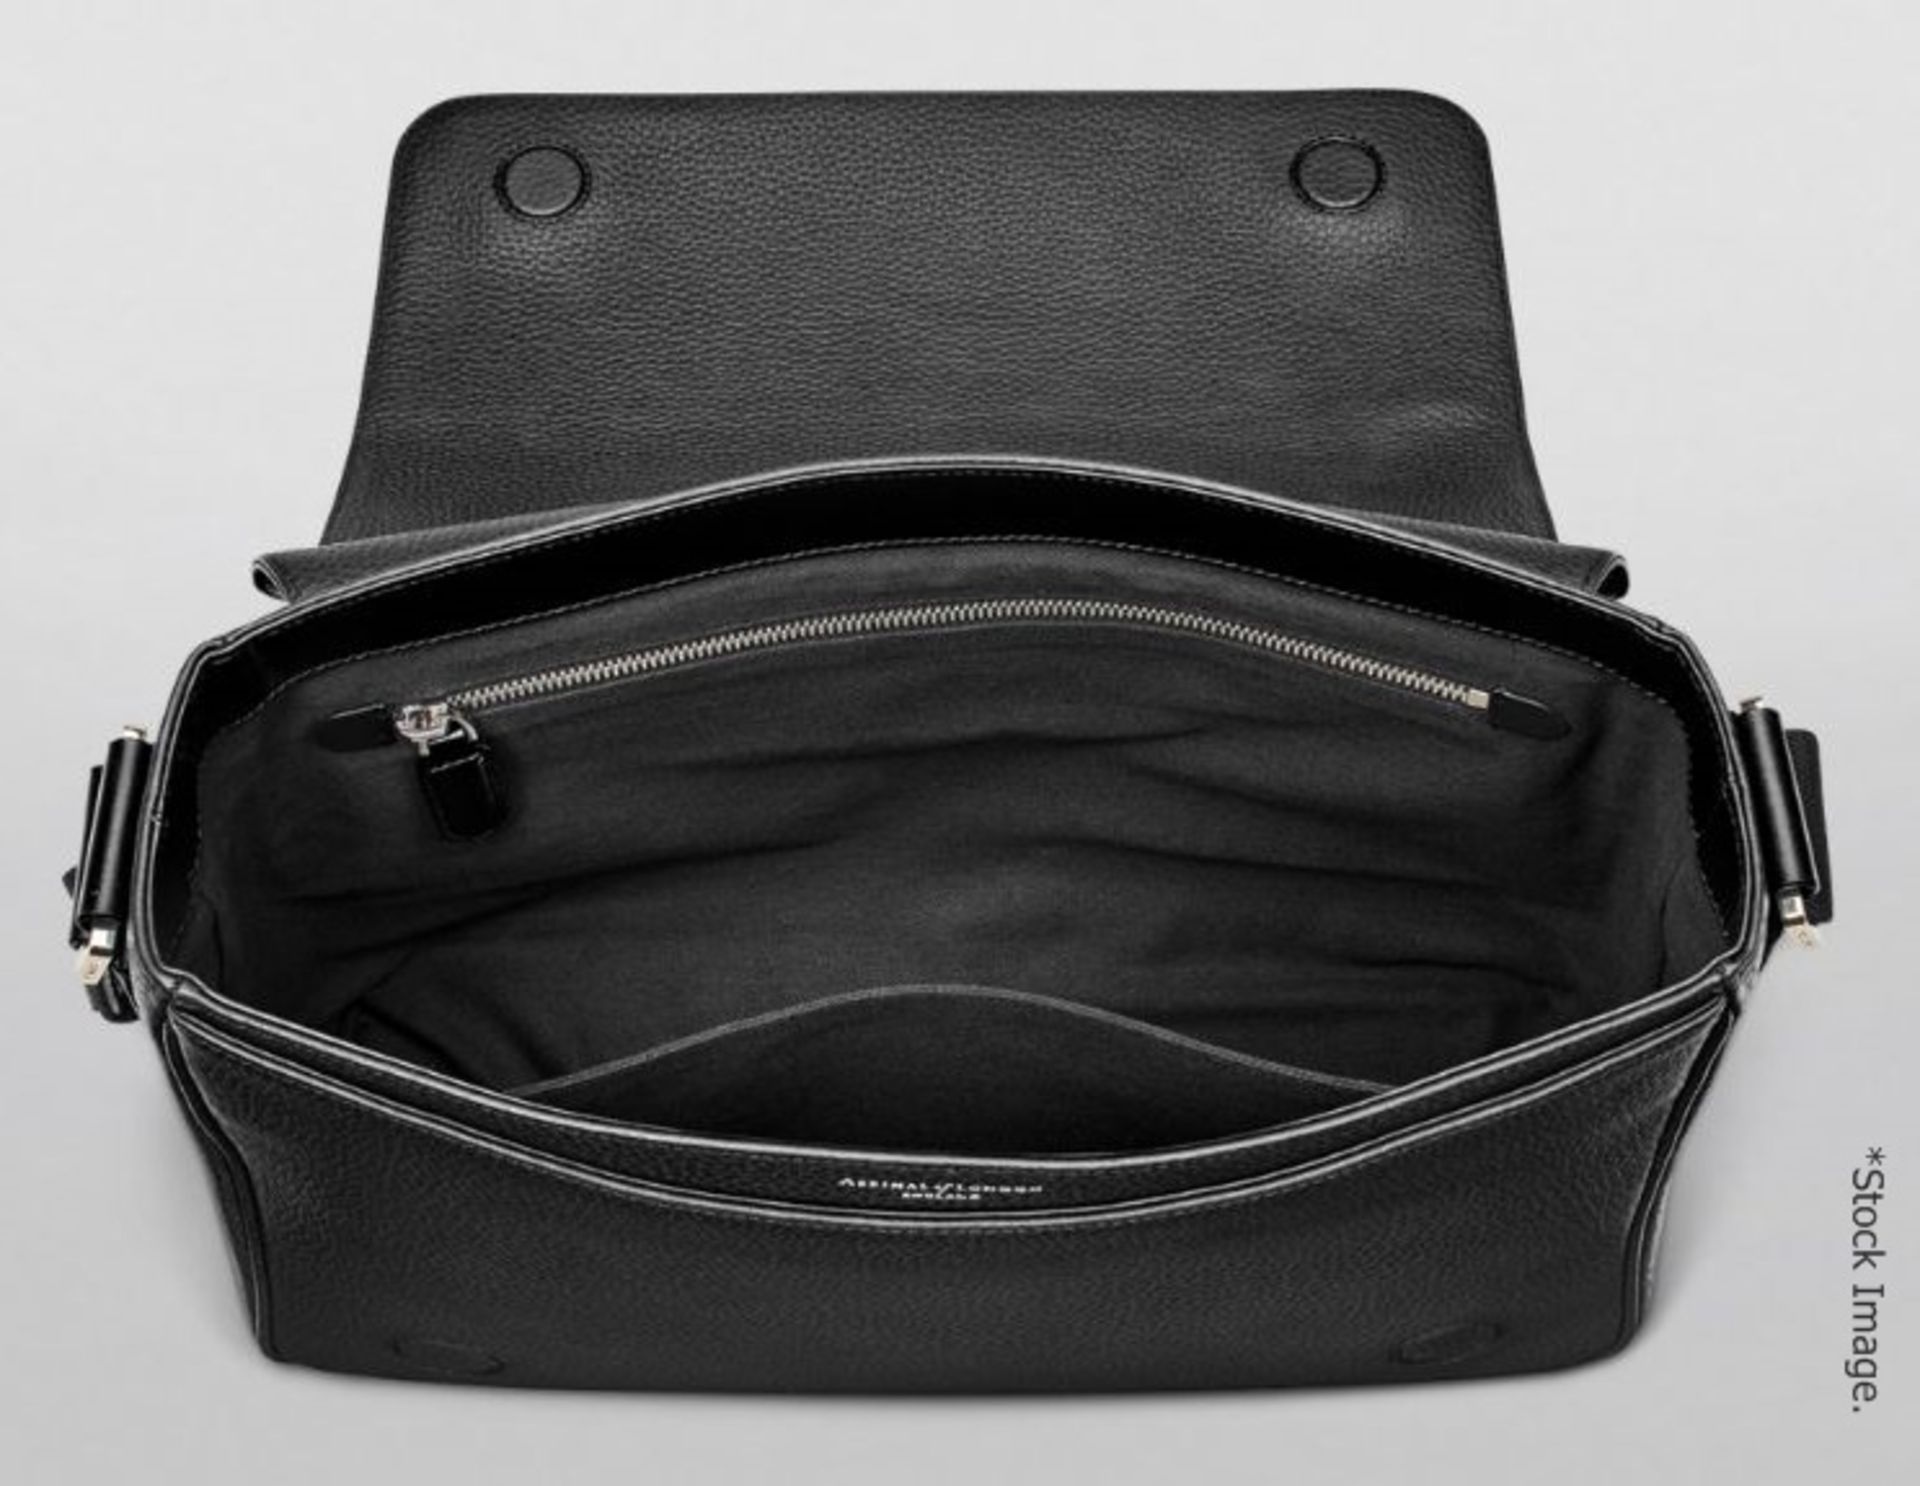 1 x ASPINAL OF LONDON Luxury Leather Reporter Messenger Bag - Original Price £450.00 - Boxed Stock - Image 3 of 5